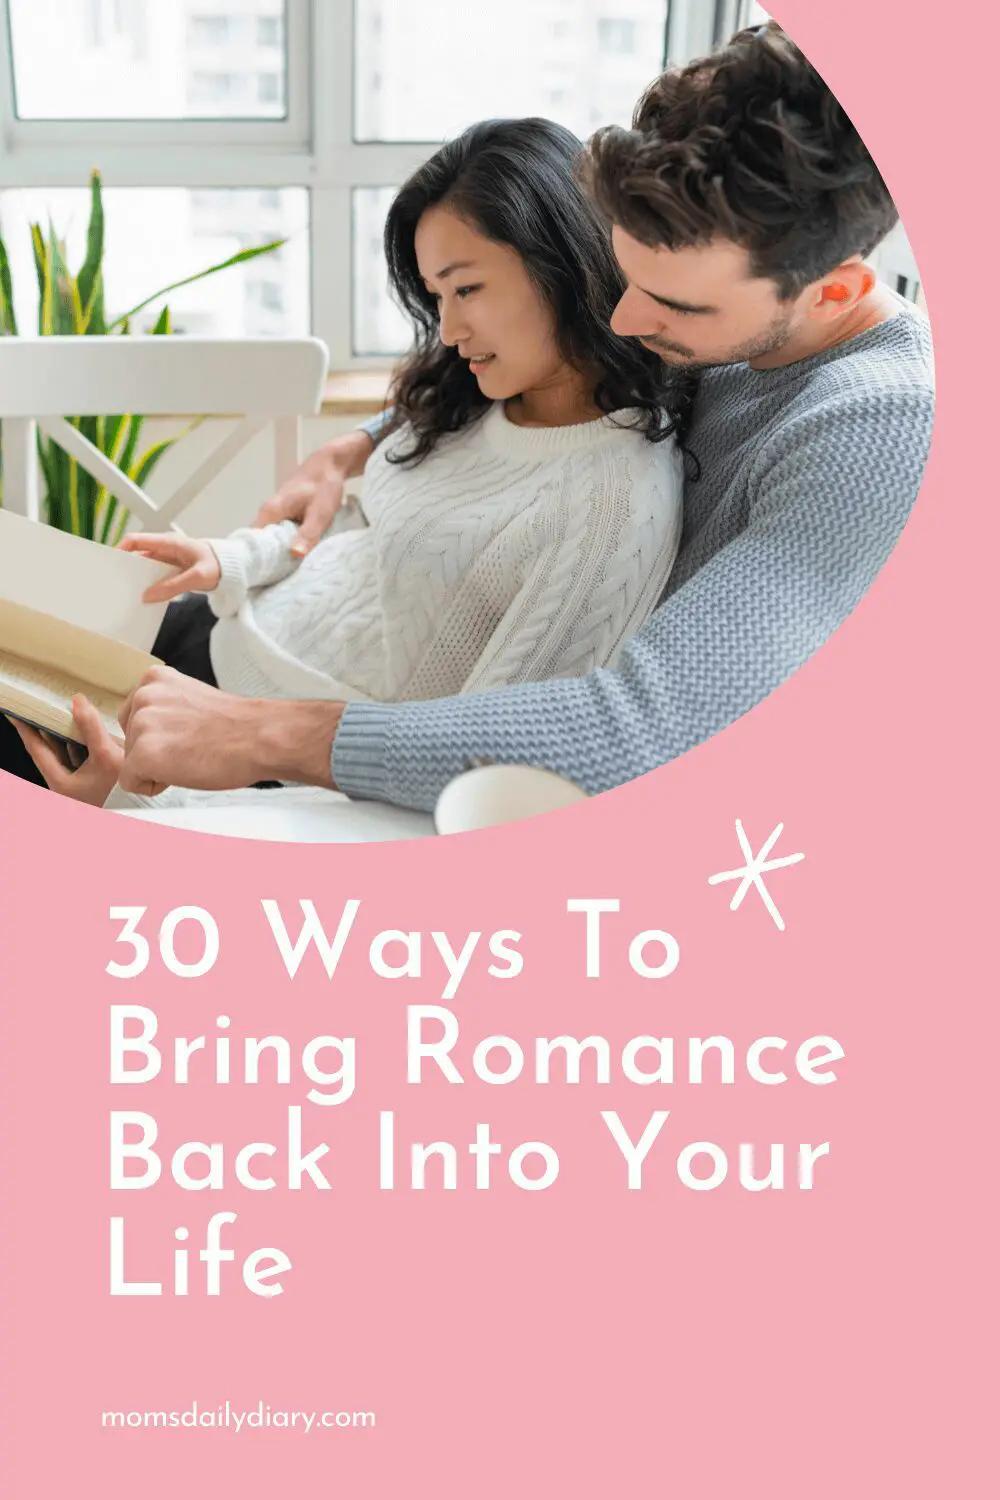 Have your life been lacking romance lately? Then check out these 30 ideas for a month full of romance for busy couples.